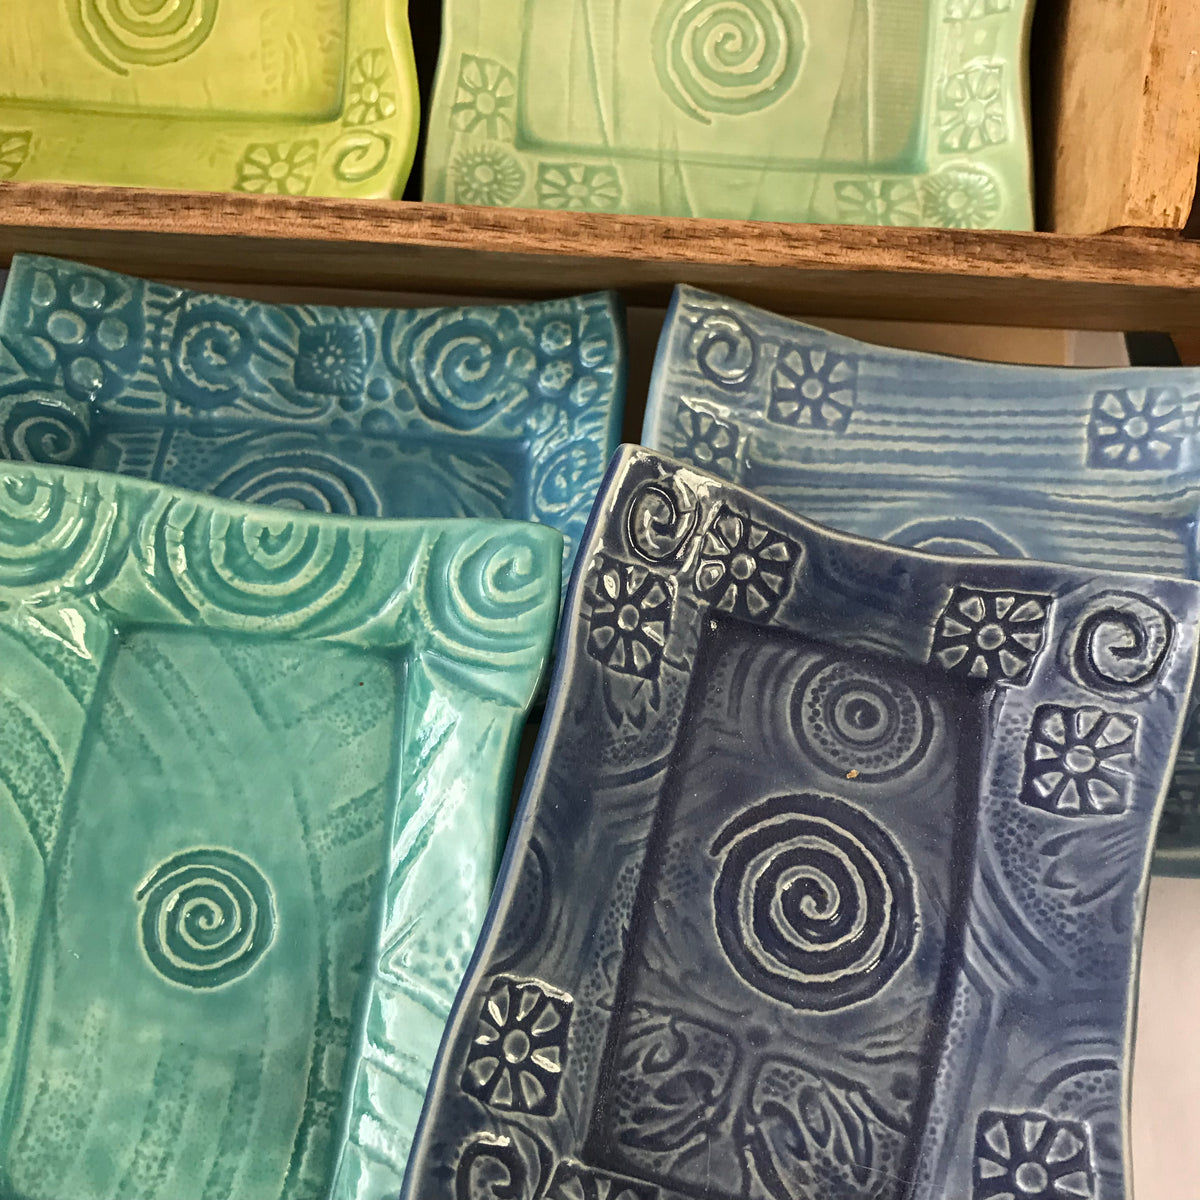 Handmade Gifts with Spiral Design would include a Spiral Design Tray that makes a perfect soap dish or spoon rest. 